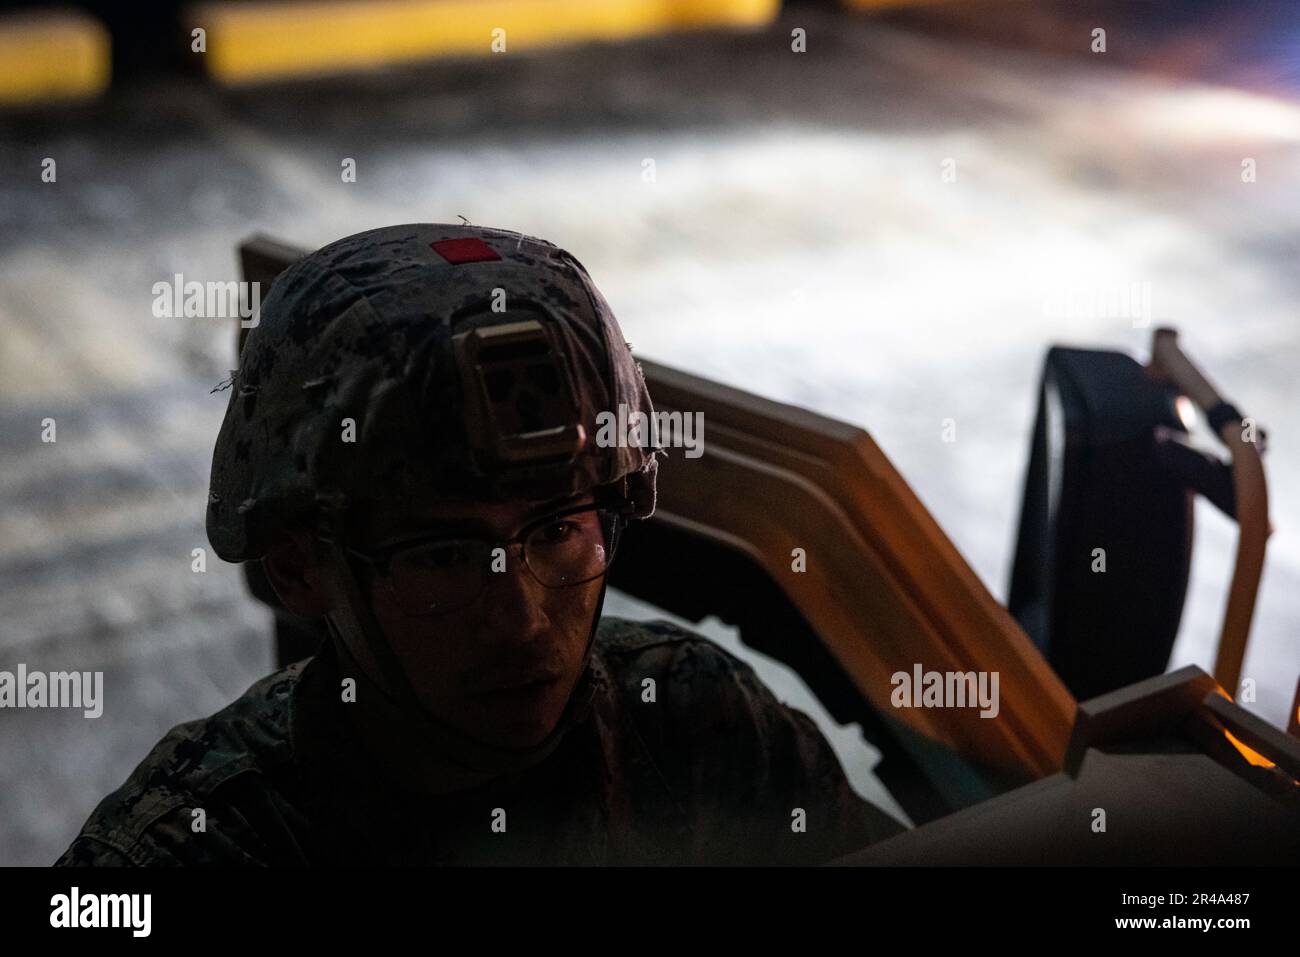 U.S. Marine Corps Lance Cpl. Takenya Yazzie, a motor transport operator with 3rd Landing Support Battalion, checks his Joint Light Tactical Vehicle prior to a convoy during a combined joint logistics over-the-shore offload in preparation for Balikatan 23 at Camp Agnew, Casiguran, Philippines, April 6, 2023. Balikatan is an annual exercise between the Armed Forces of the Philippines and U.S. military designed to strengthen bilateral interoperability, capabilities, trust, and cooperation built over decades shared experiences. Stock Photo